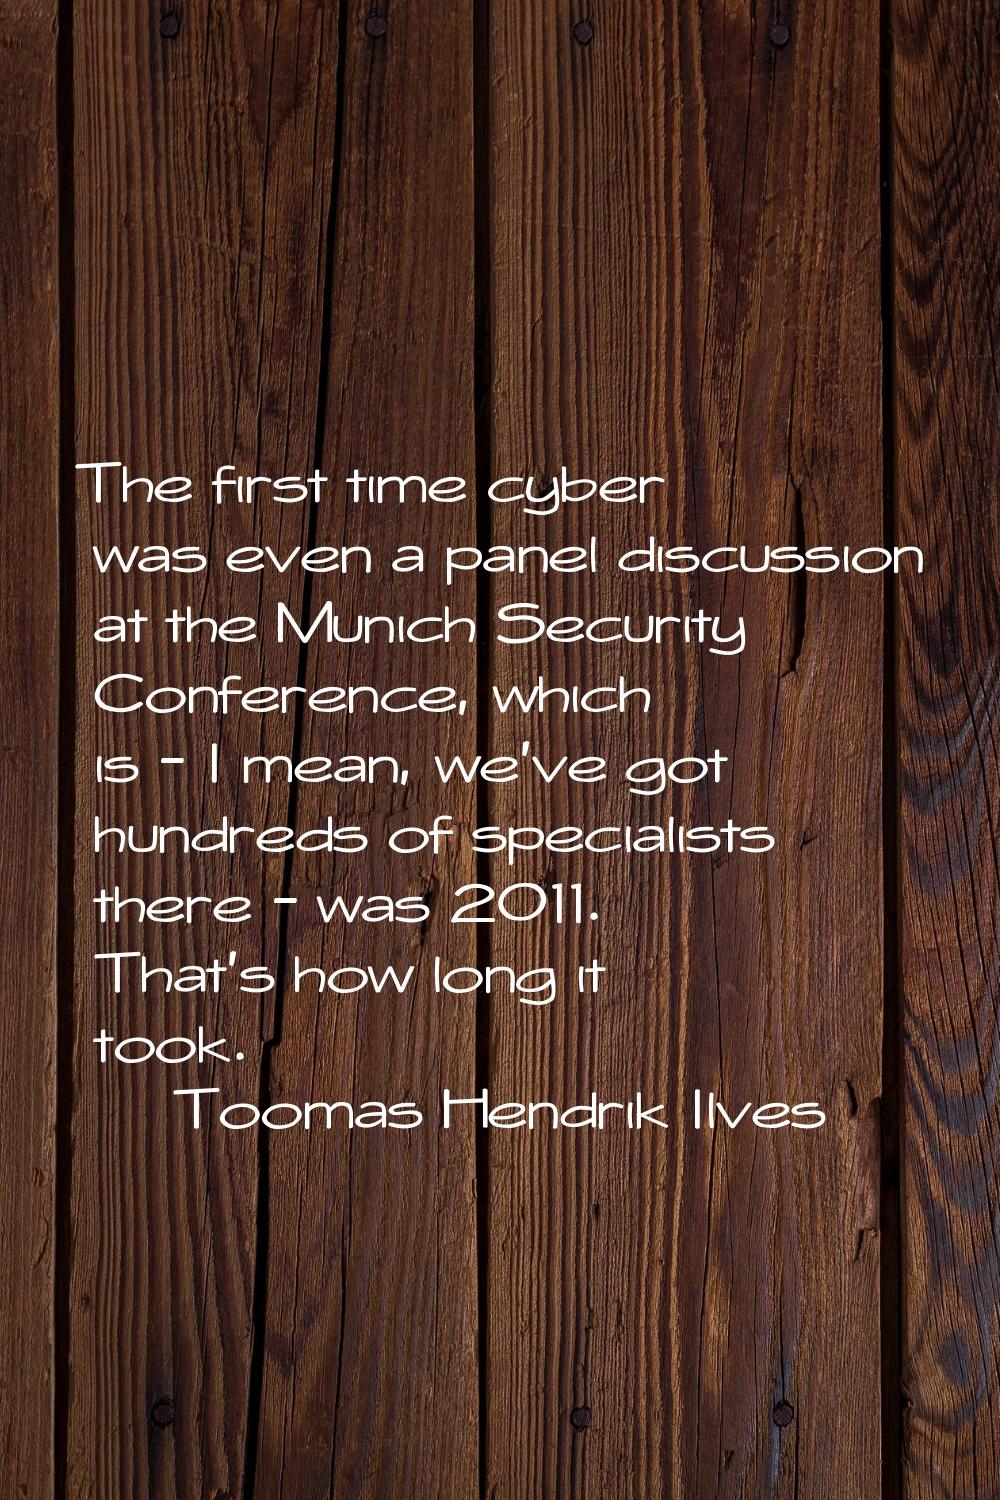 The first time cyber was even a panel discussion at the Munich Security Conference, which is - I me